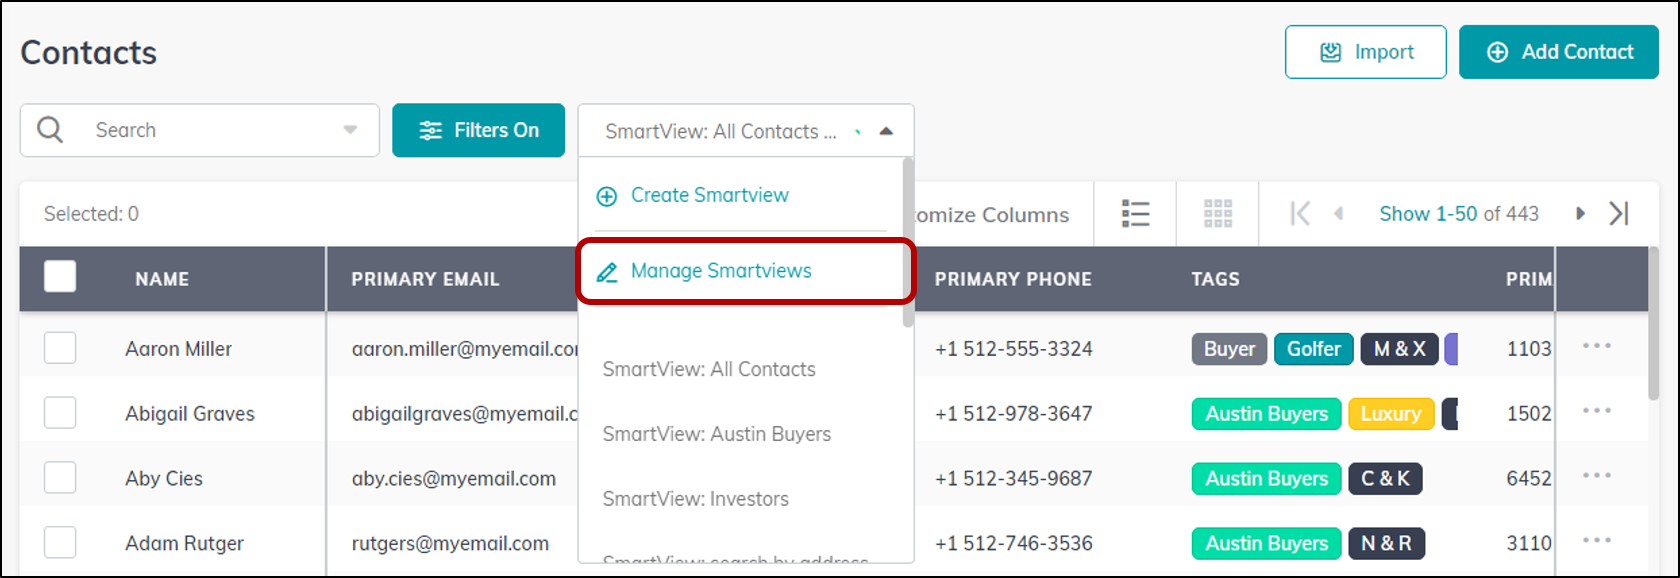 contacts_manage_smartviews.png